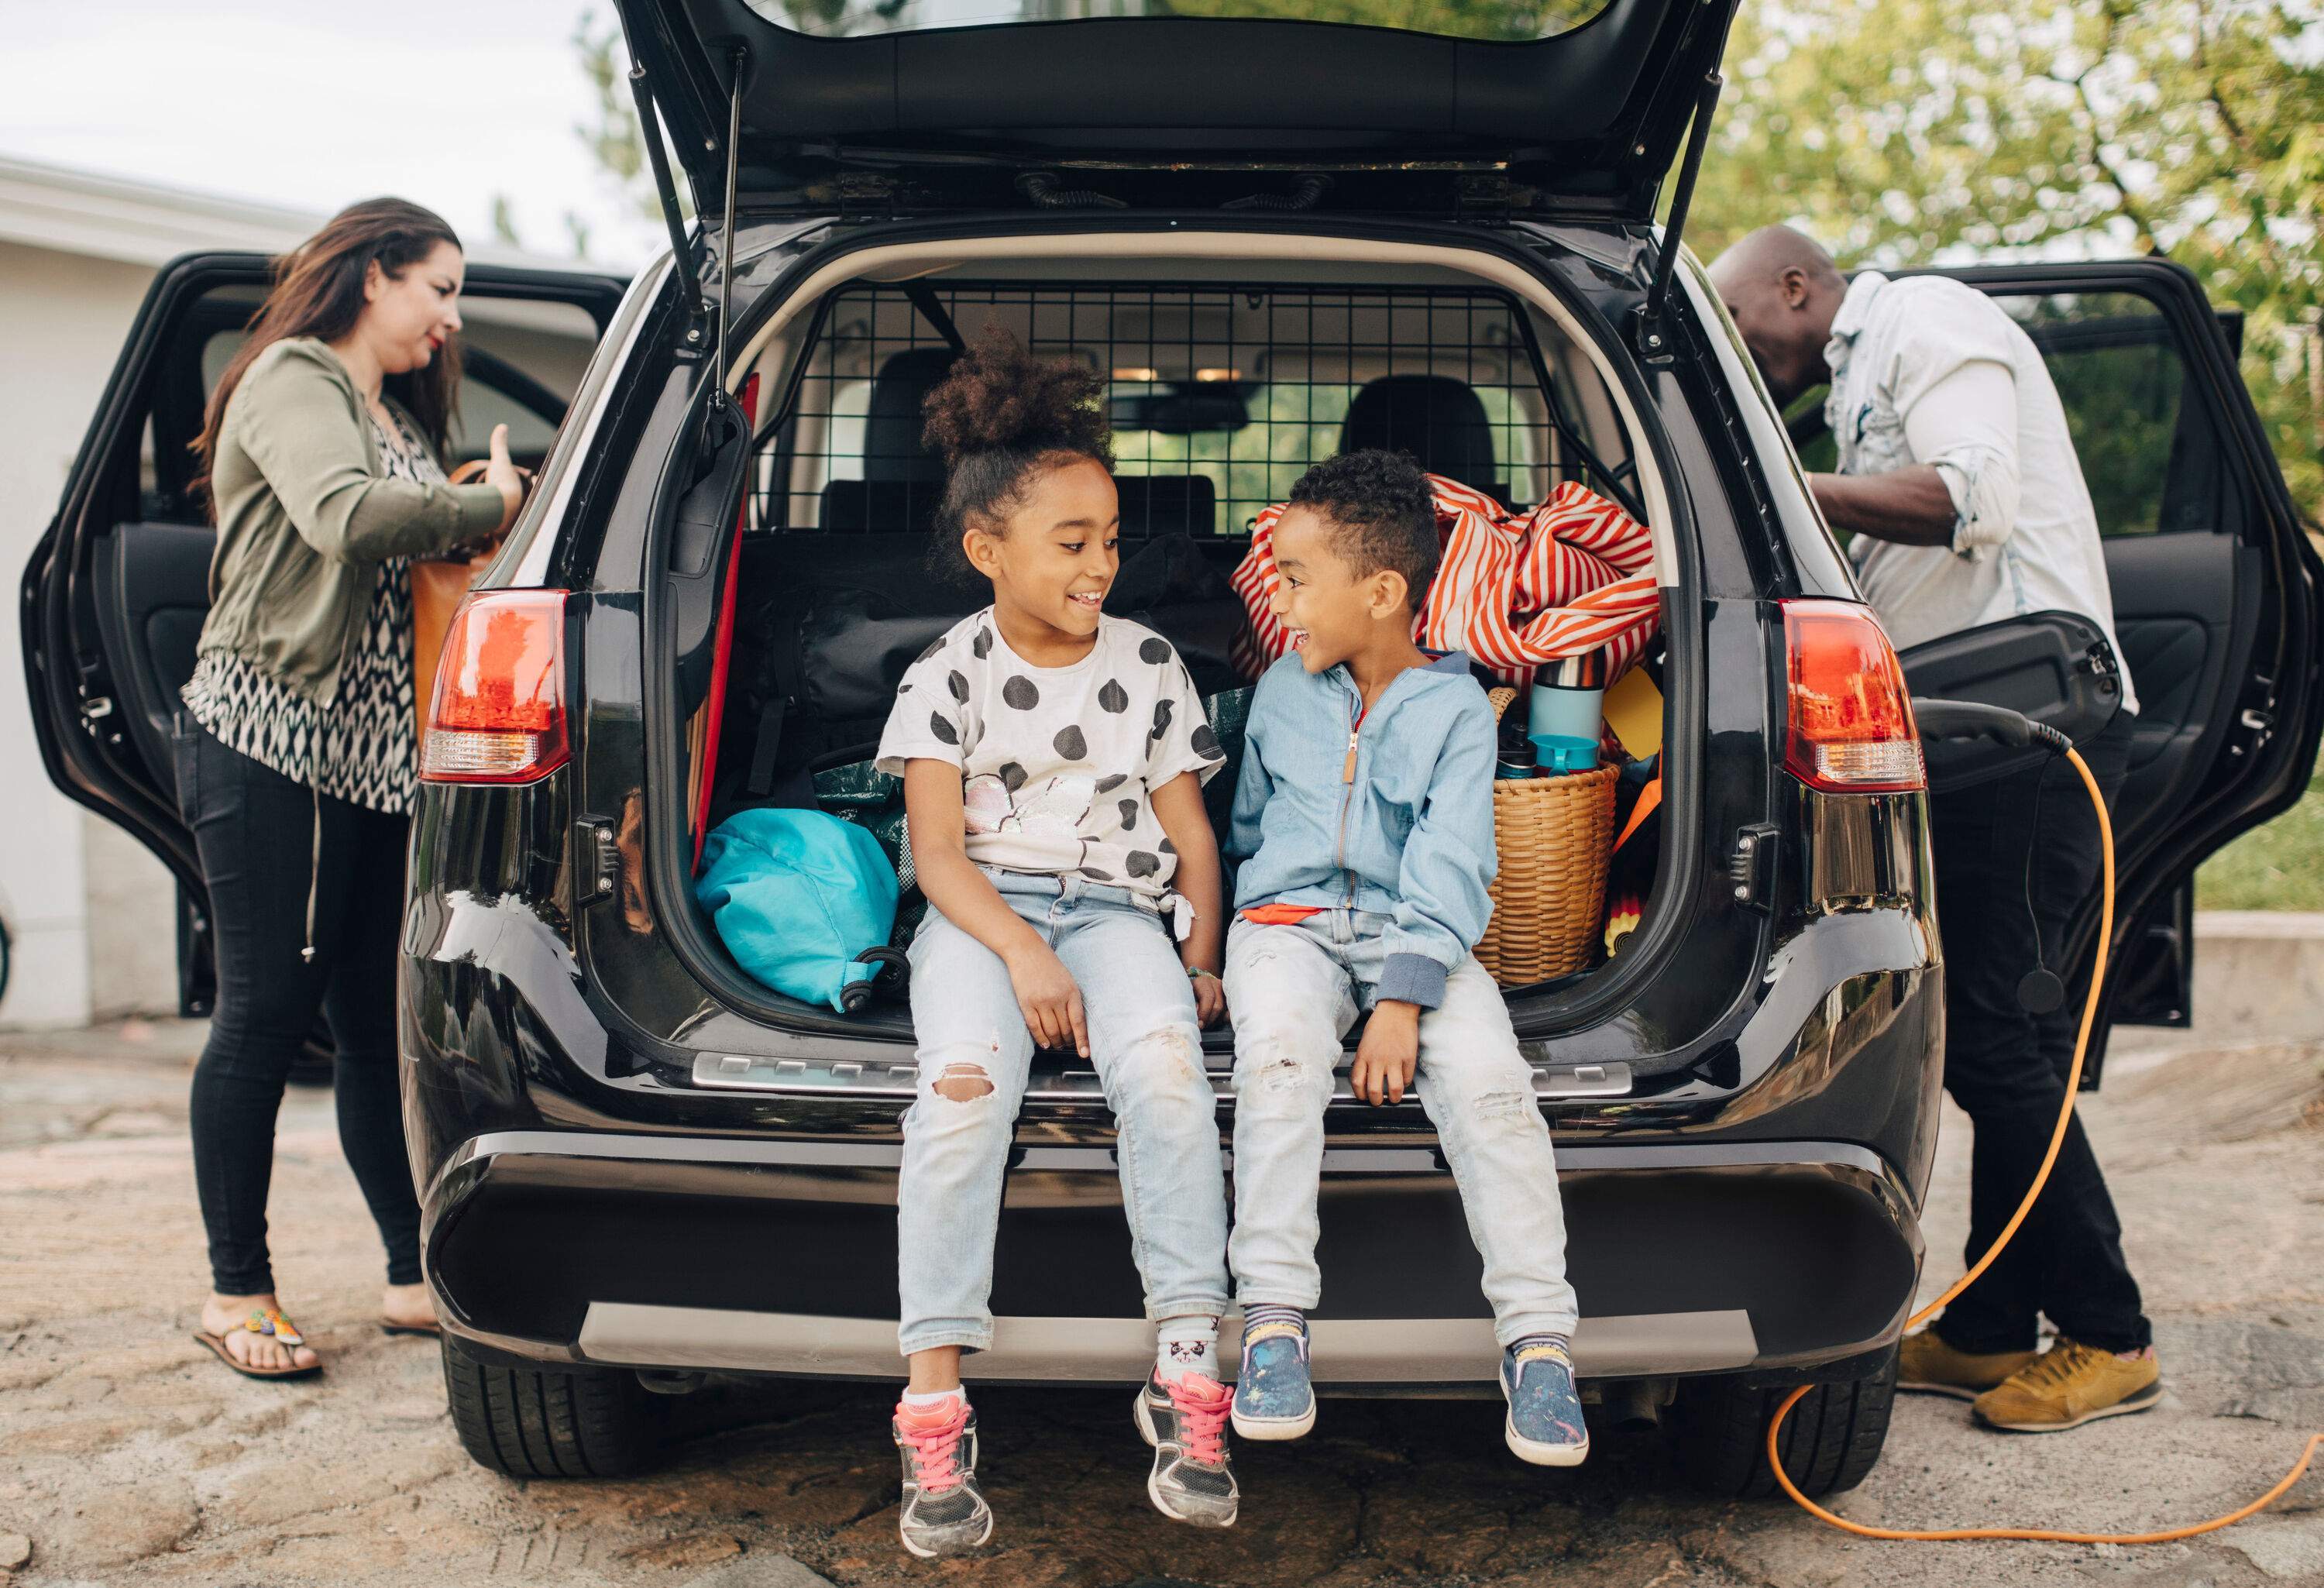 Happy siblings sit on a car trunk while their parents load up their bags inside the car.